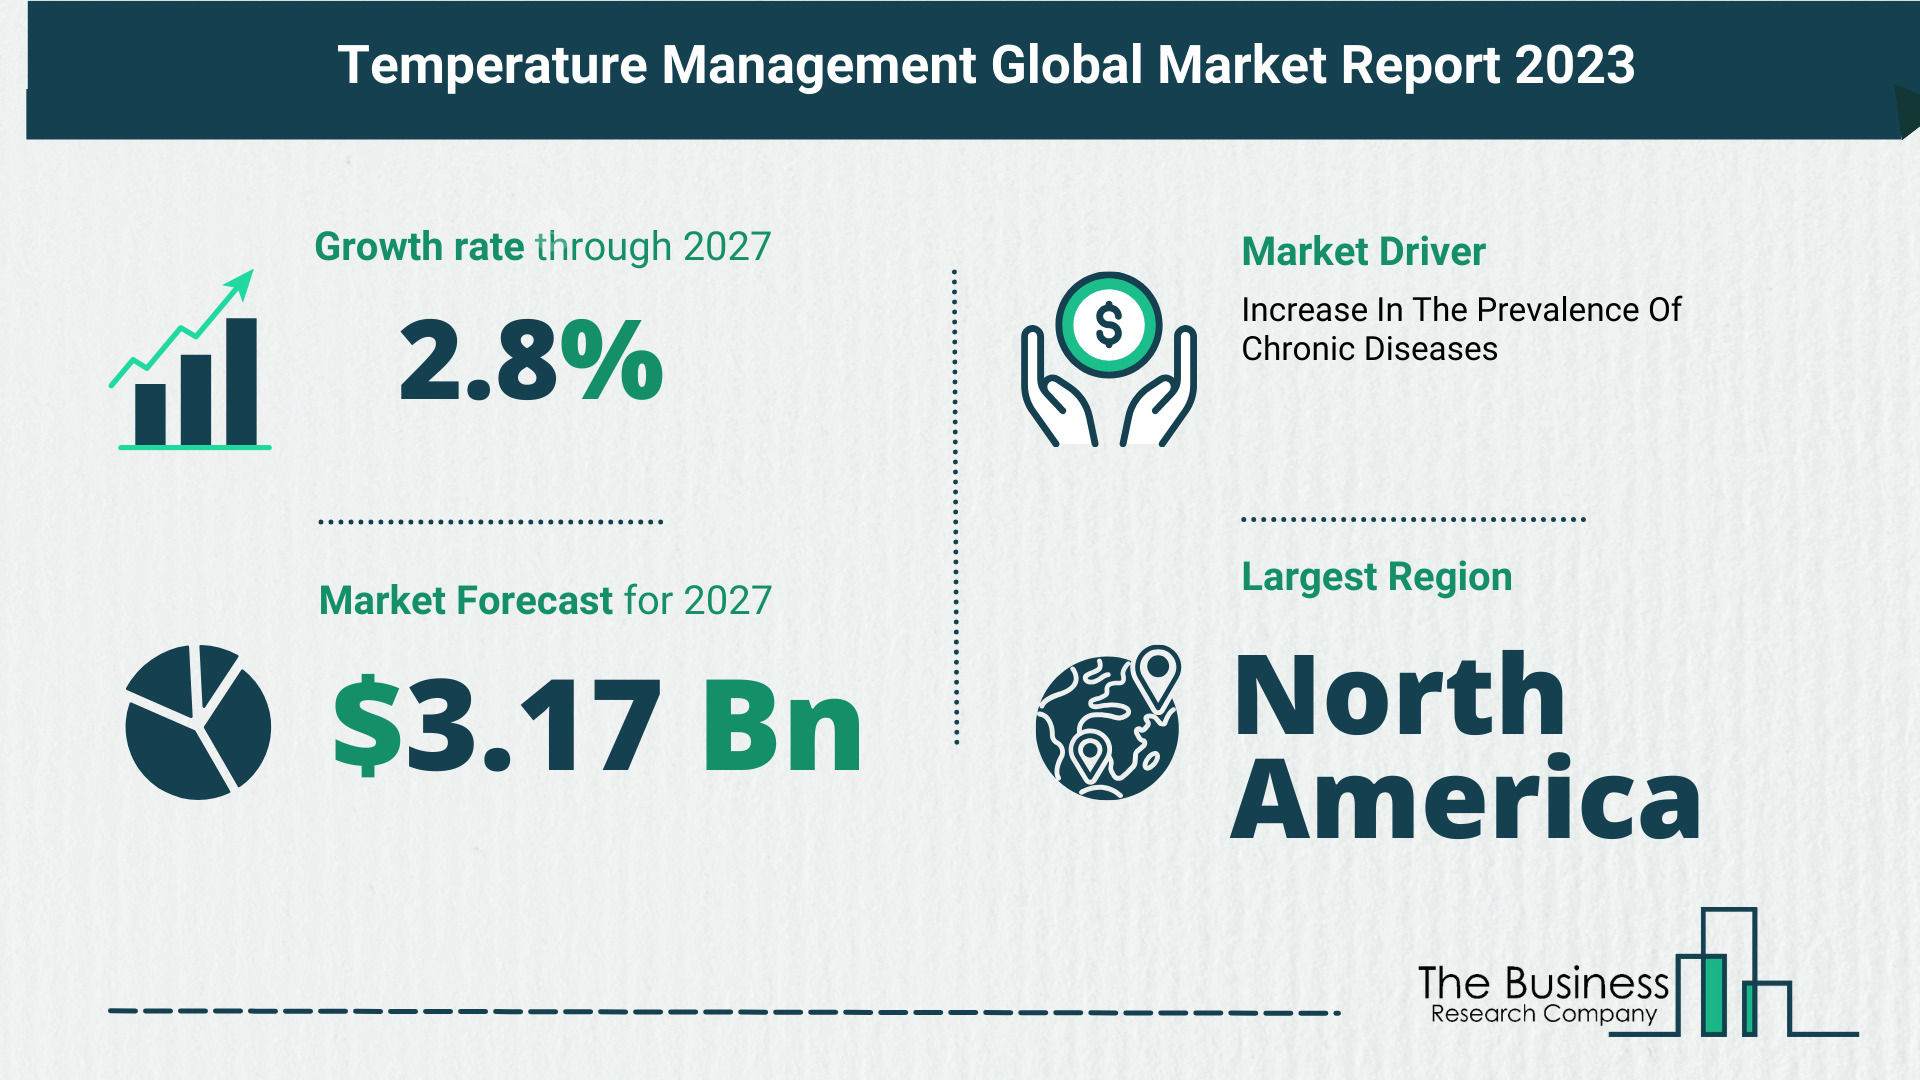 5 Key Insights On The Temperature Management Market 2023